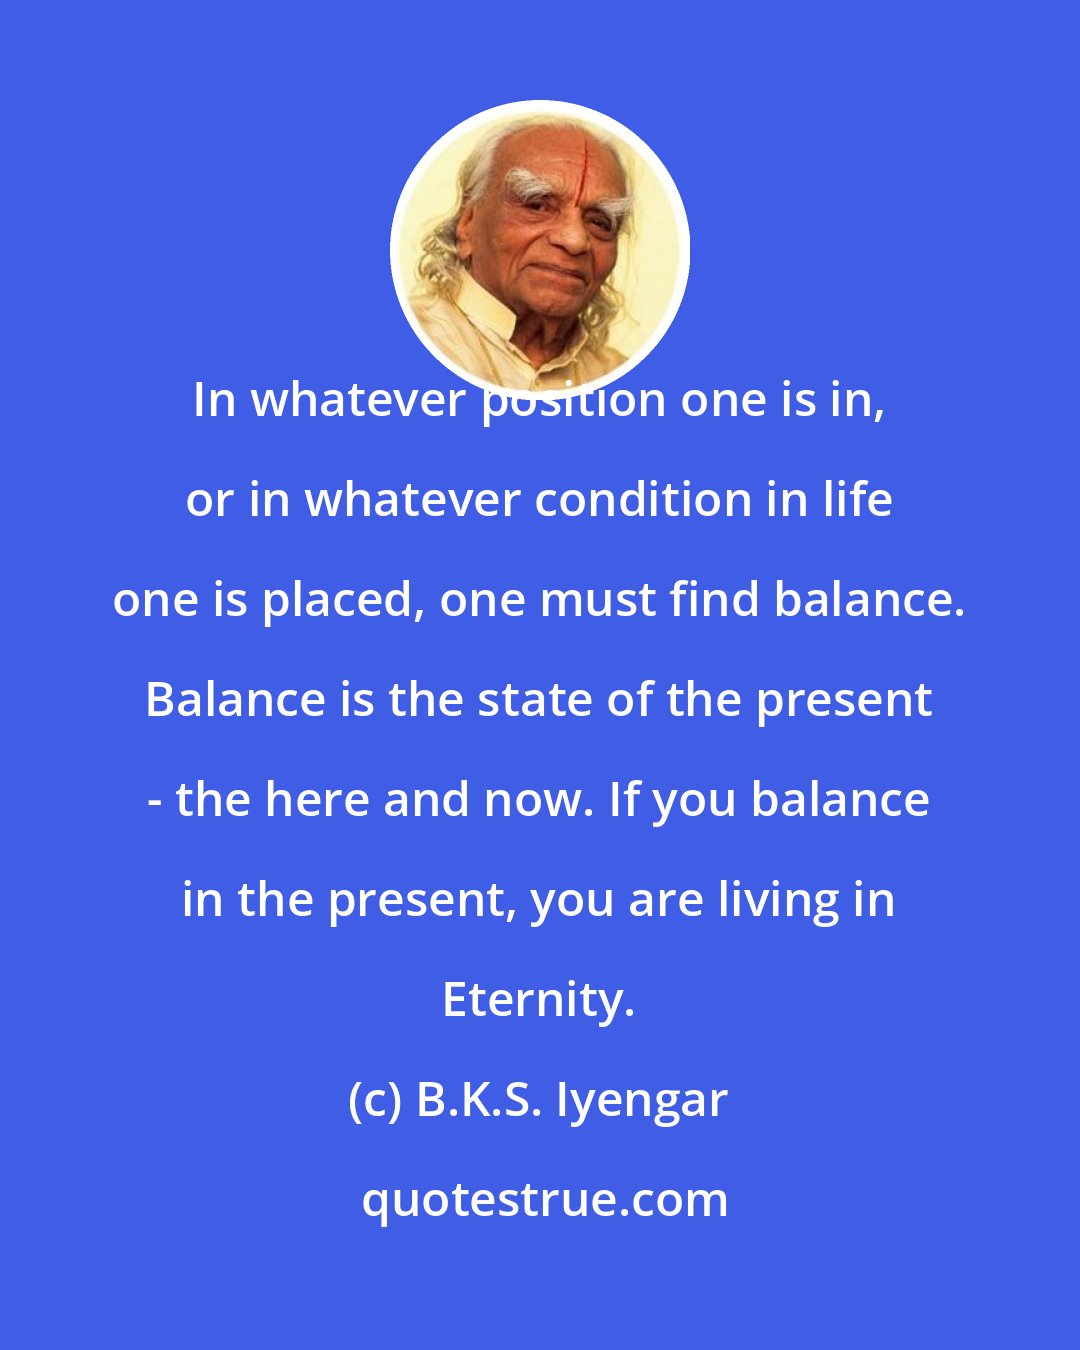 B.K.S. Iyengar: In whatever position one is in, or in whatever condition in life one is placed, one must find balance. Balance is the state of the present - the here and now. If you balance in the present, you are living in Eternity.